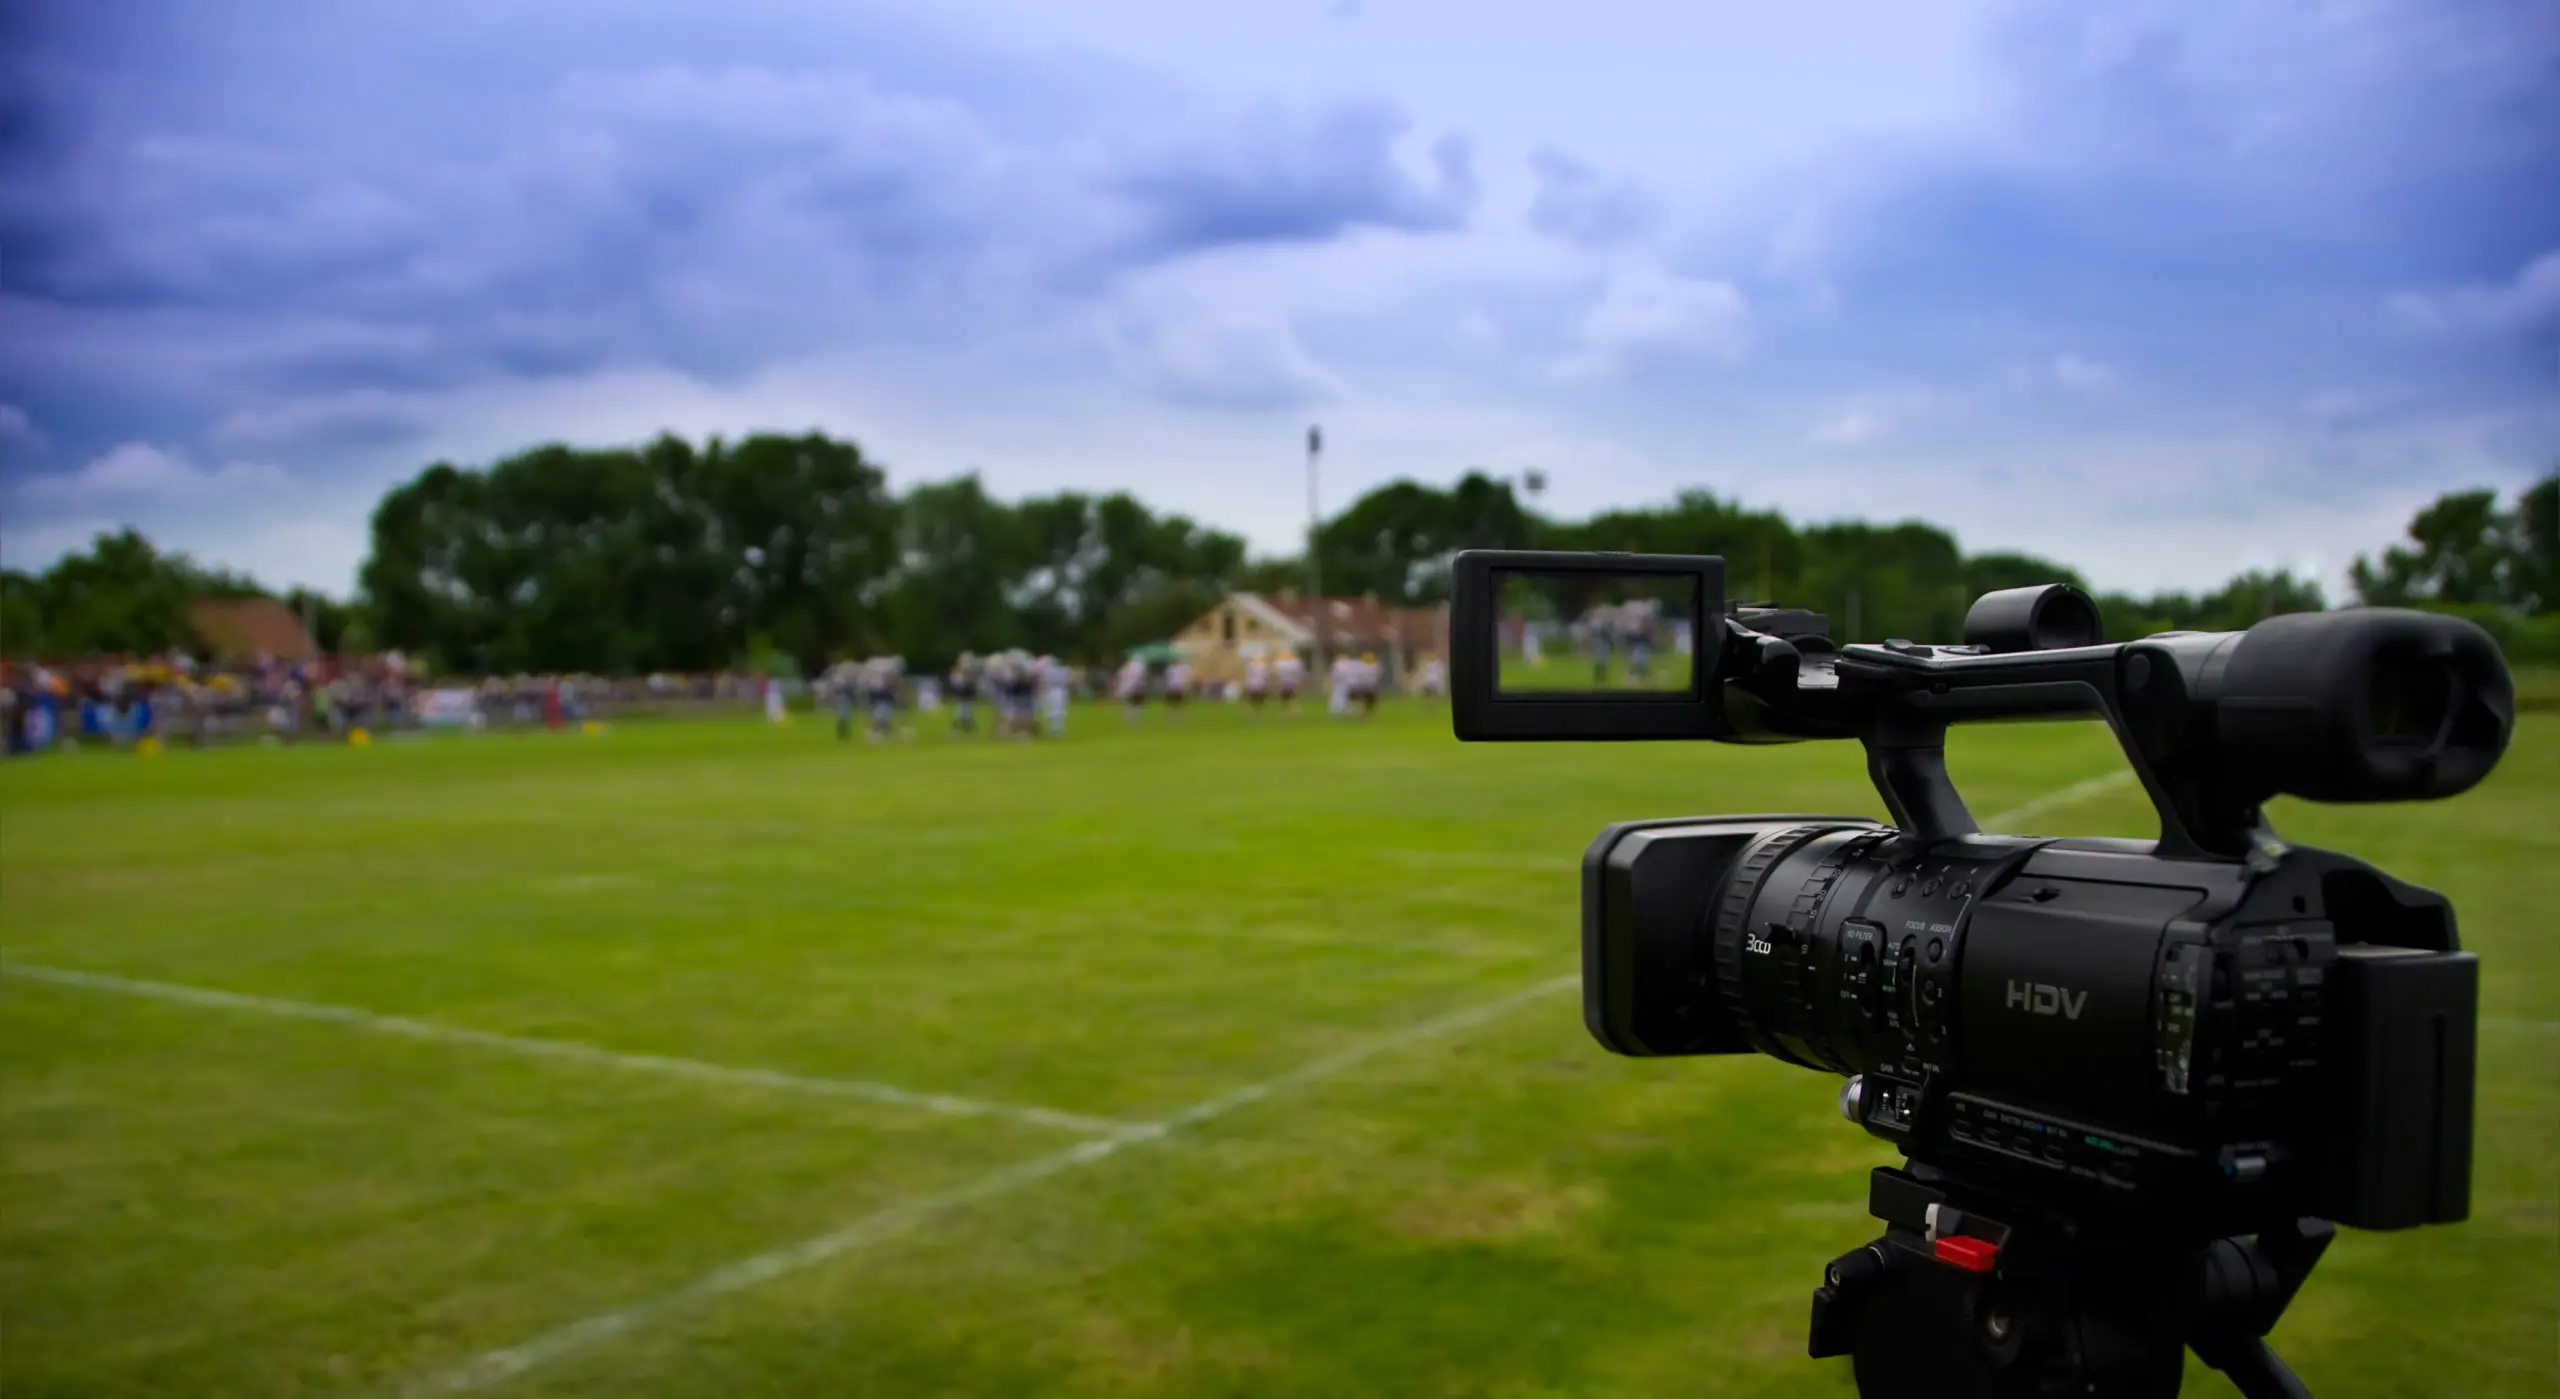 Featured image: How Youth Sports Clubs Can Better Utilize Video